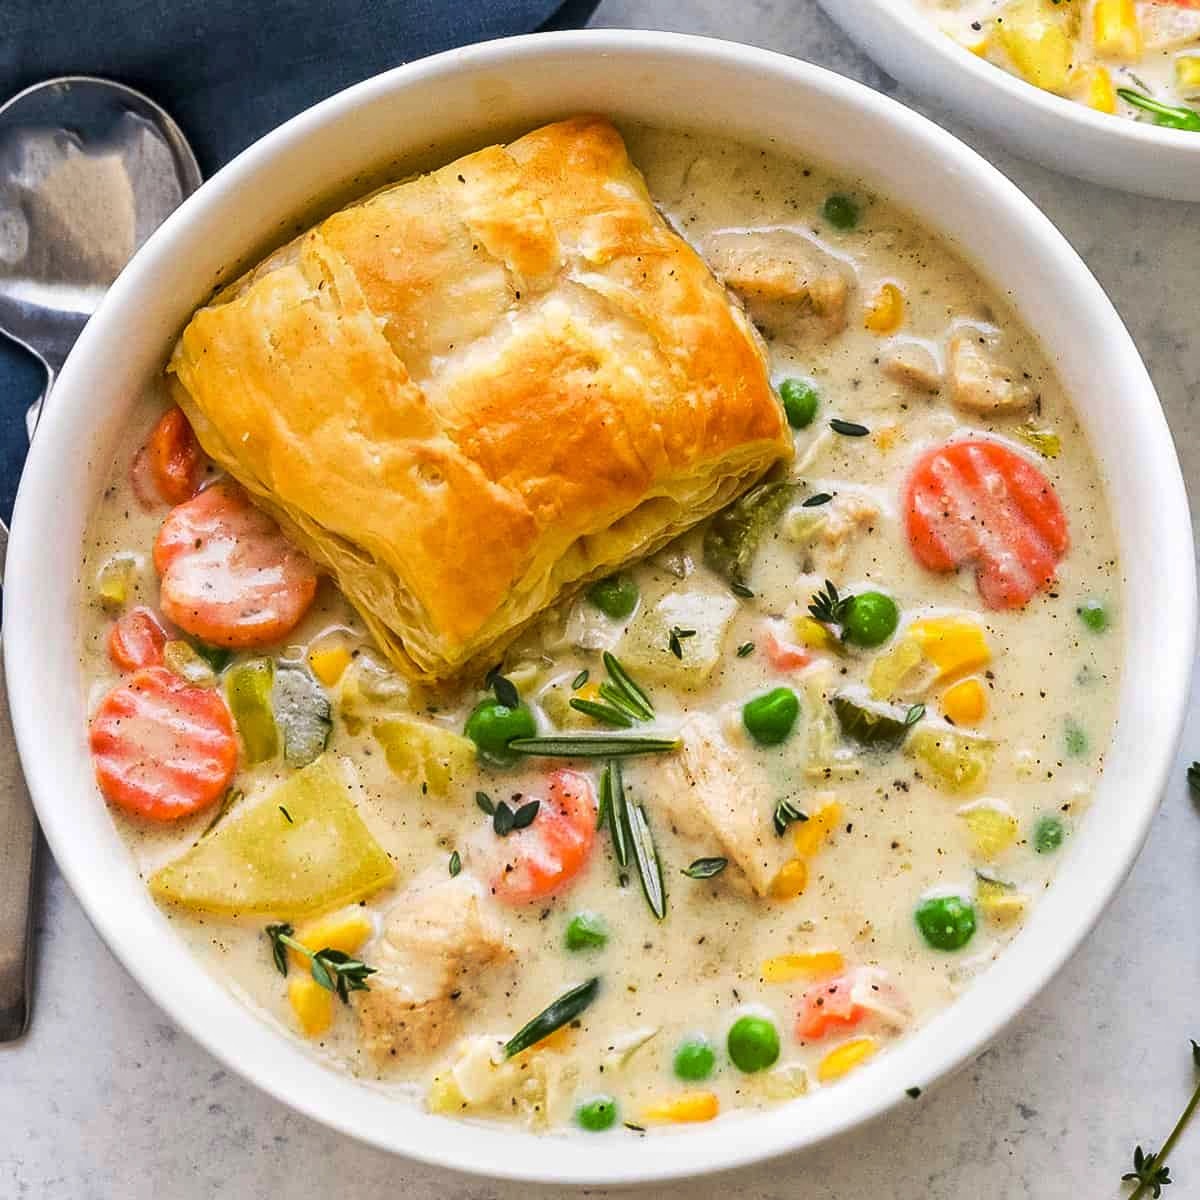 How To Make Chicken Pot Pie With Cream Of Chicken Soup - Recipes.net